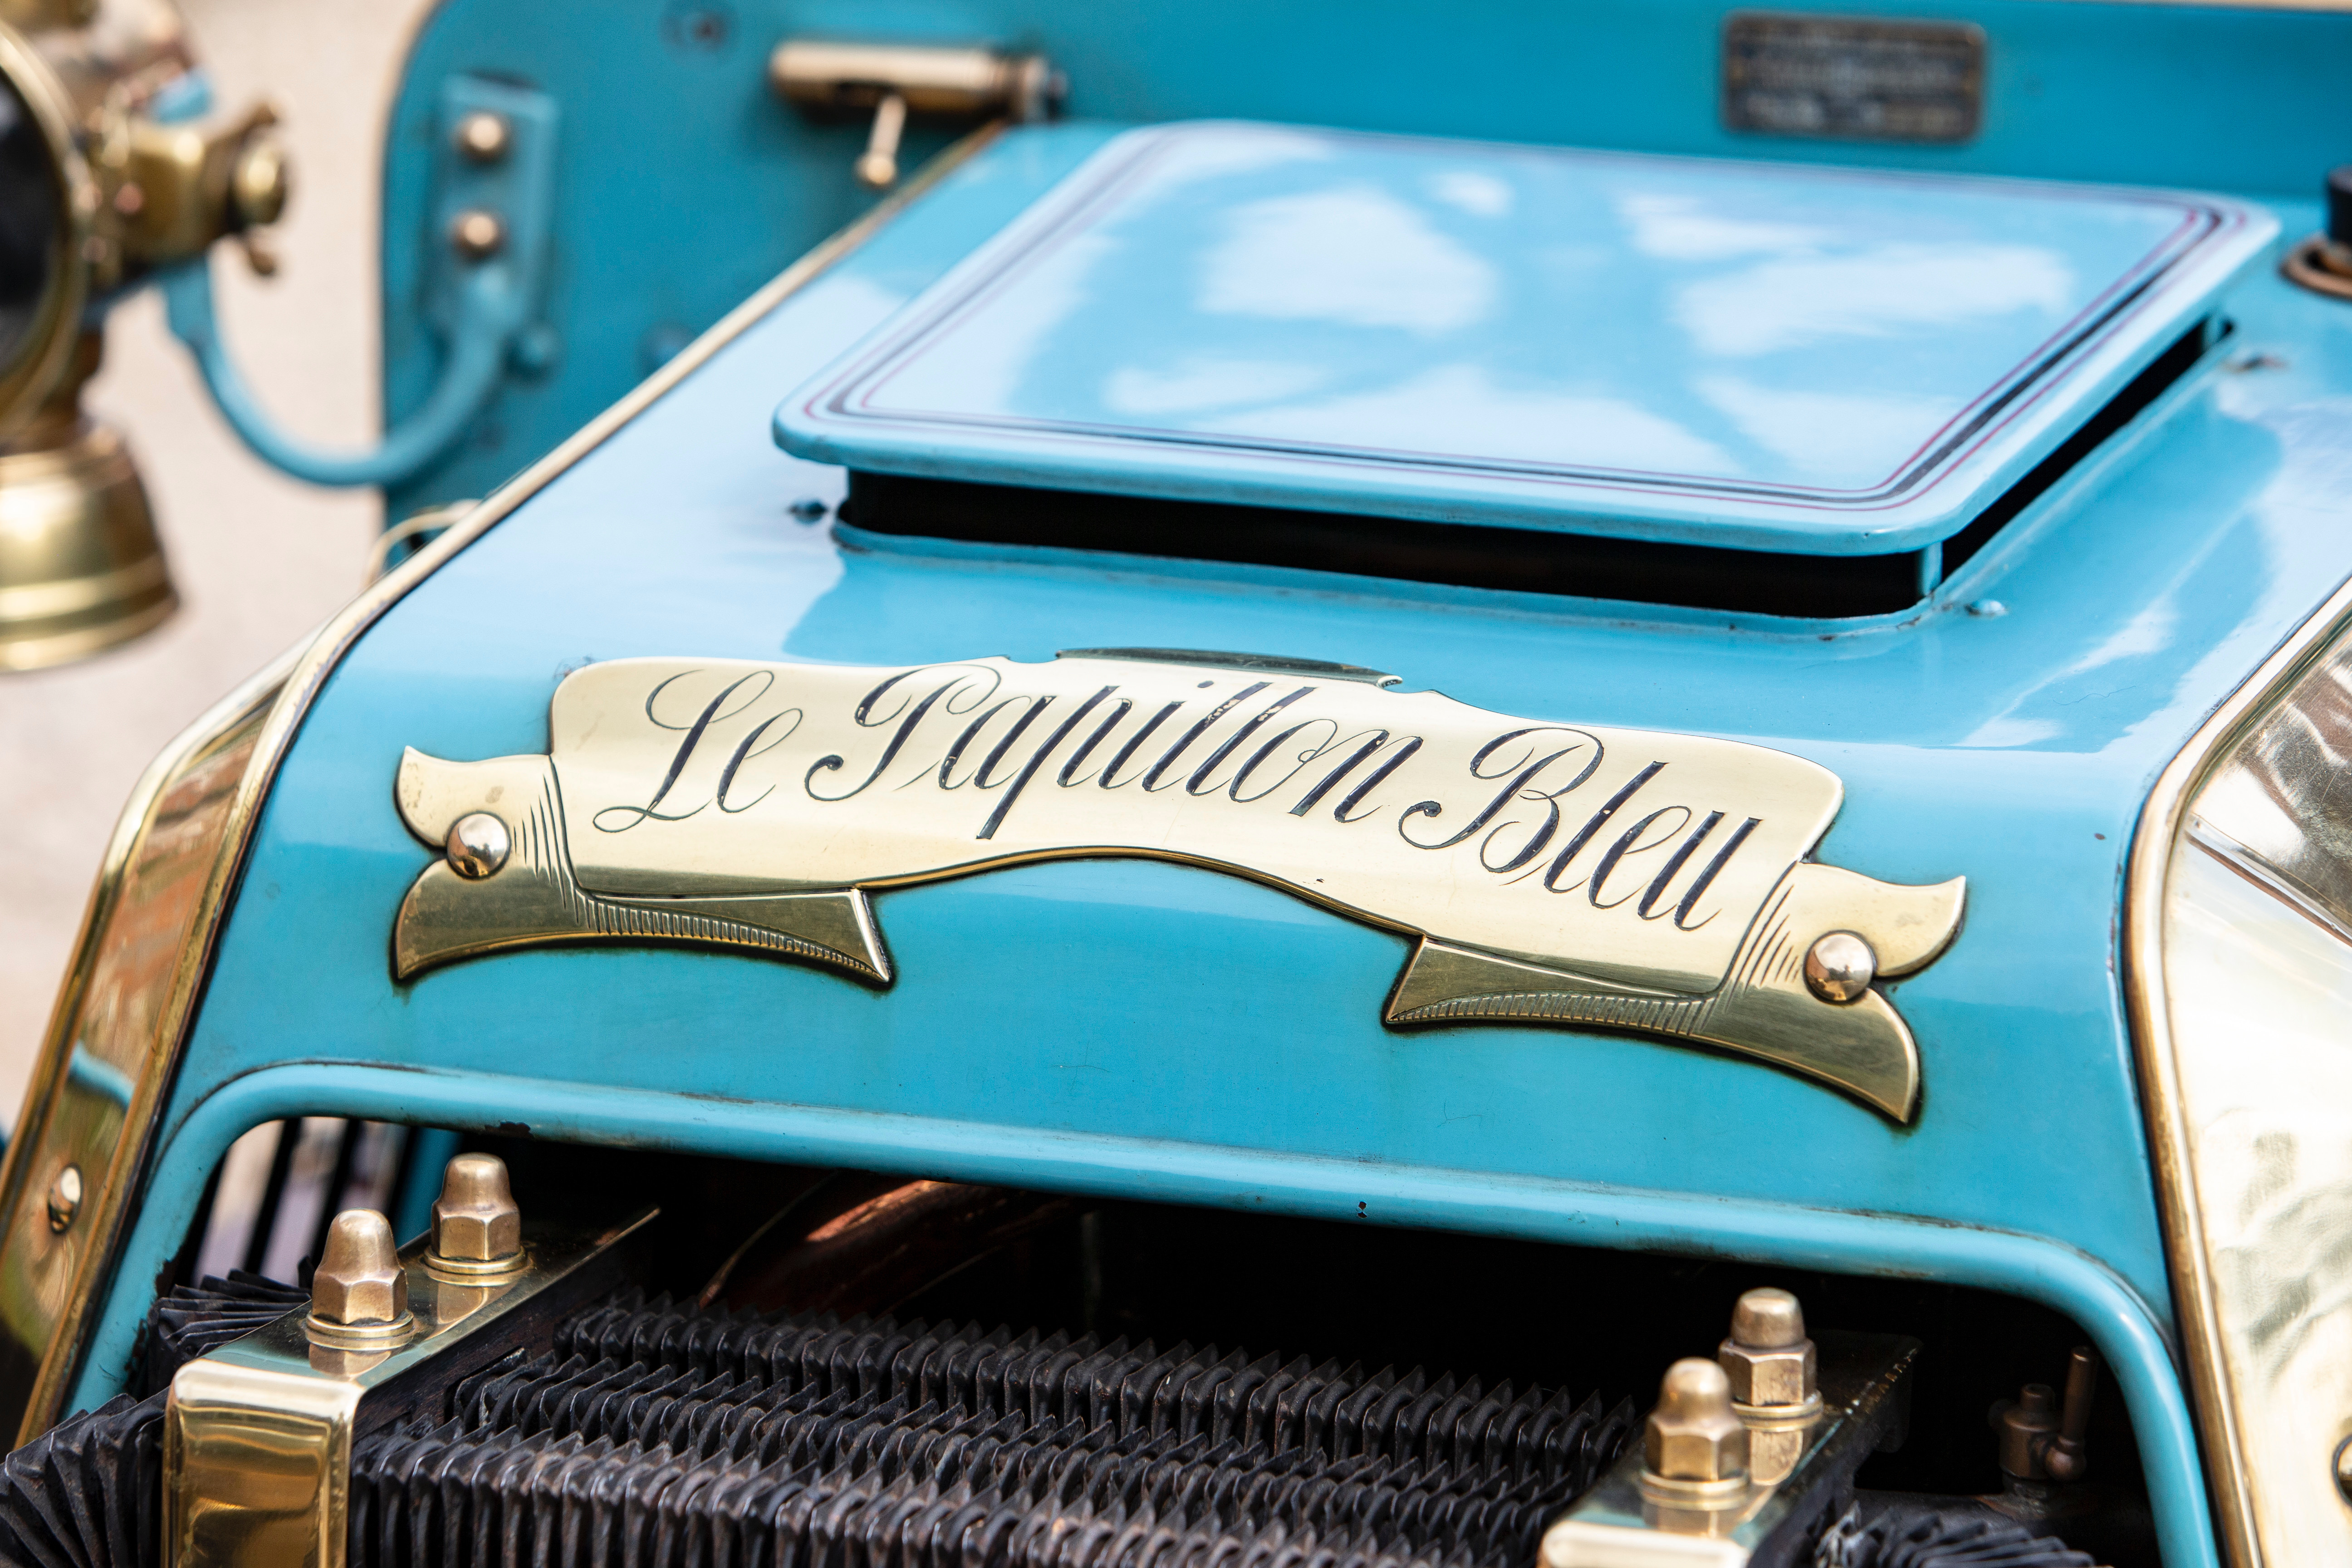 Blue Butterfly, ‘Blue Butterfly’ comes with London-to-Brighton entry, ClassicCars.com Journal